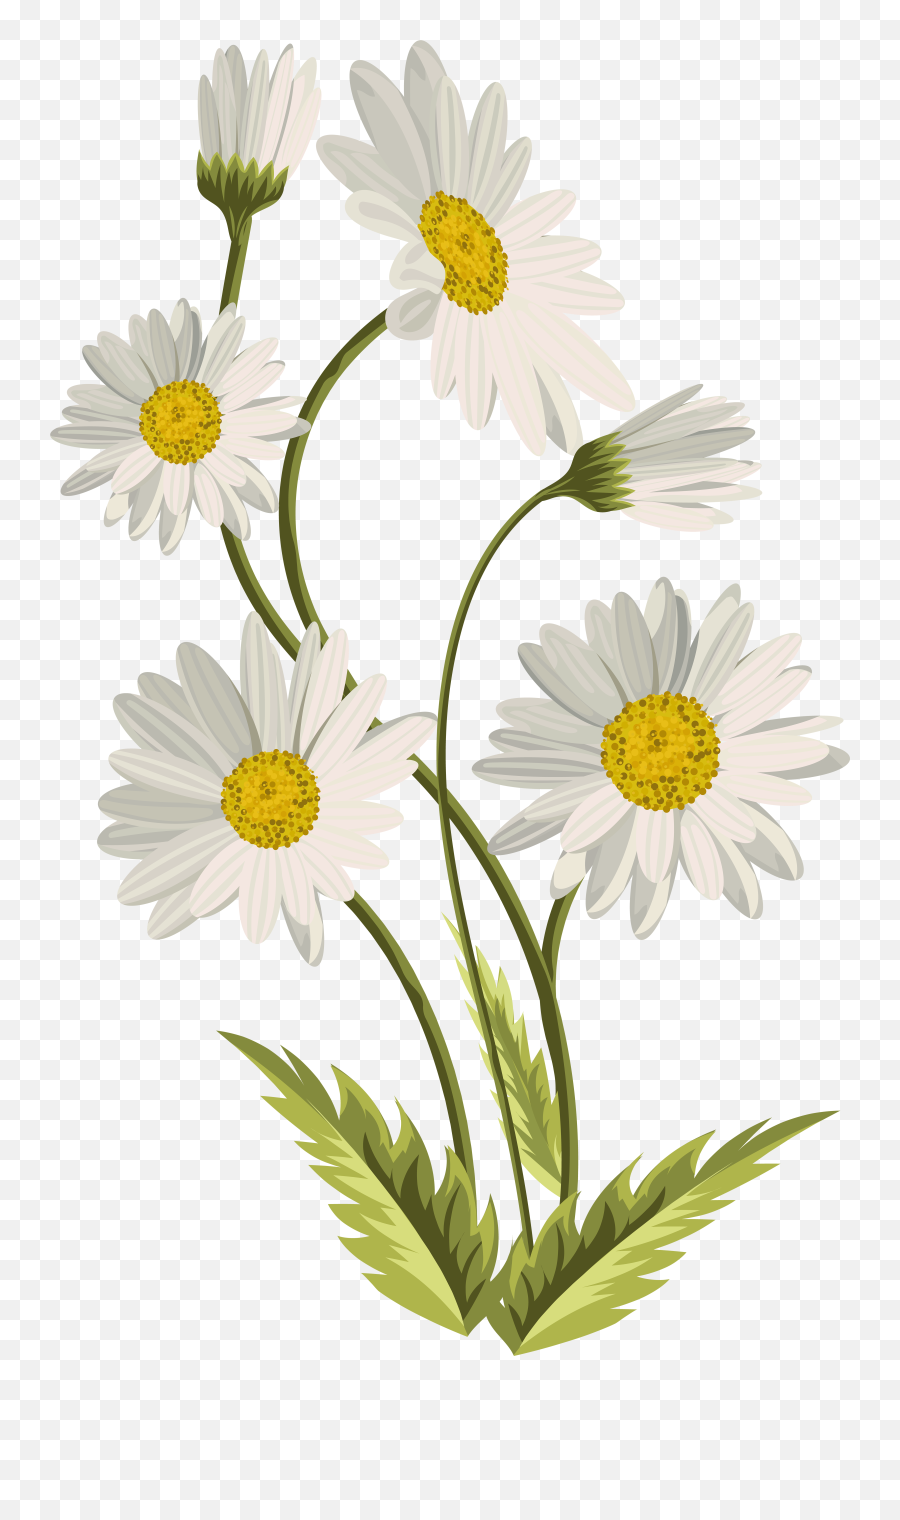 Daisies Transparent Png Clip Art Image Gallery Flower Clipart Background